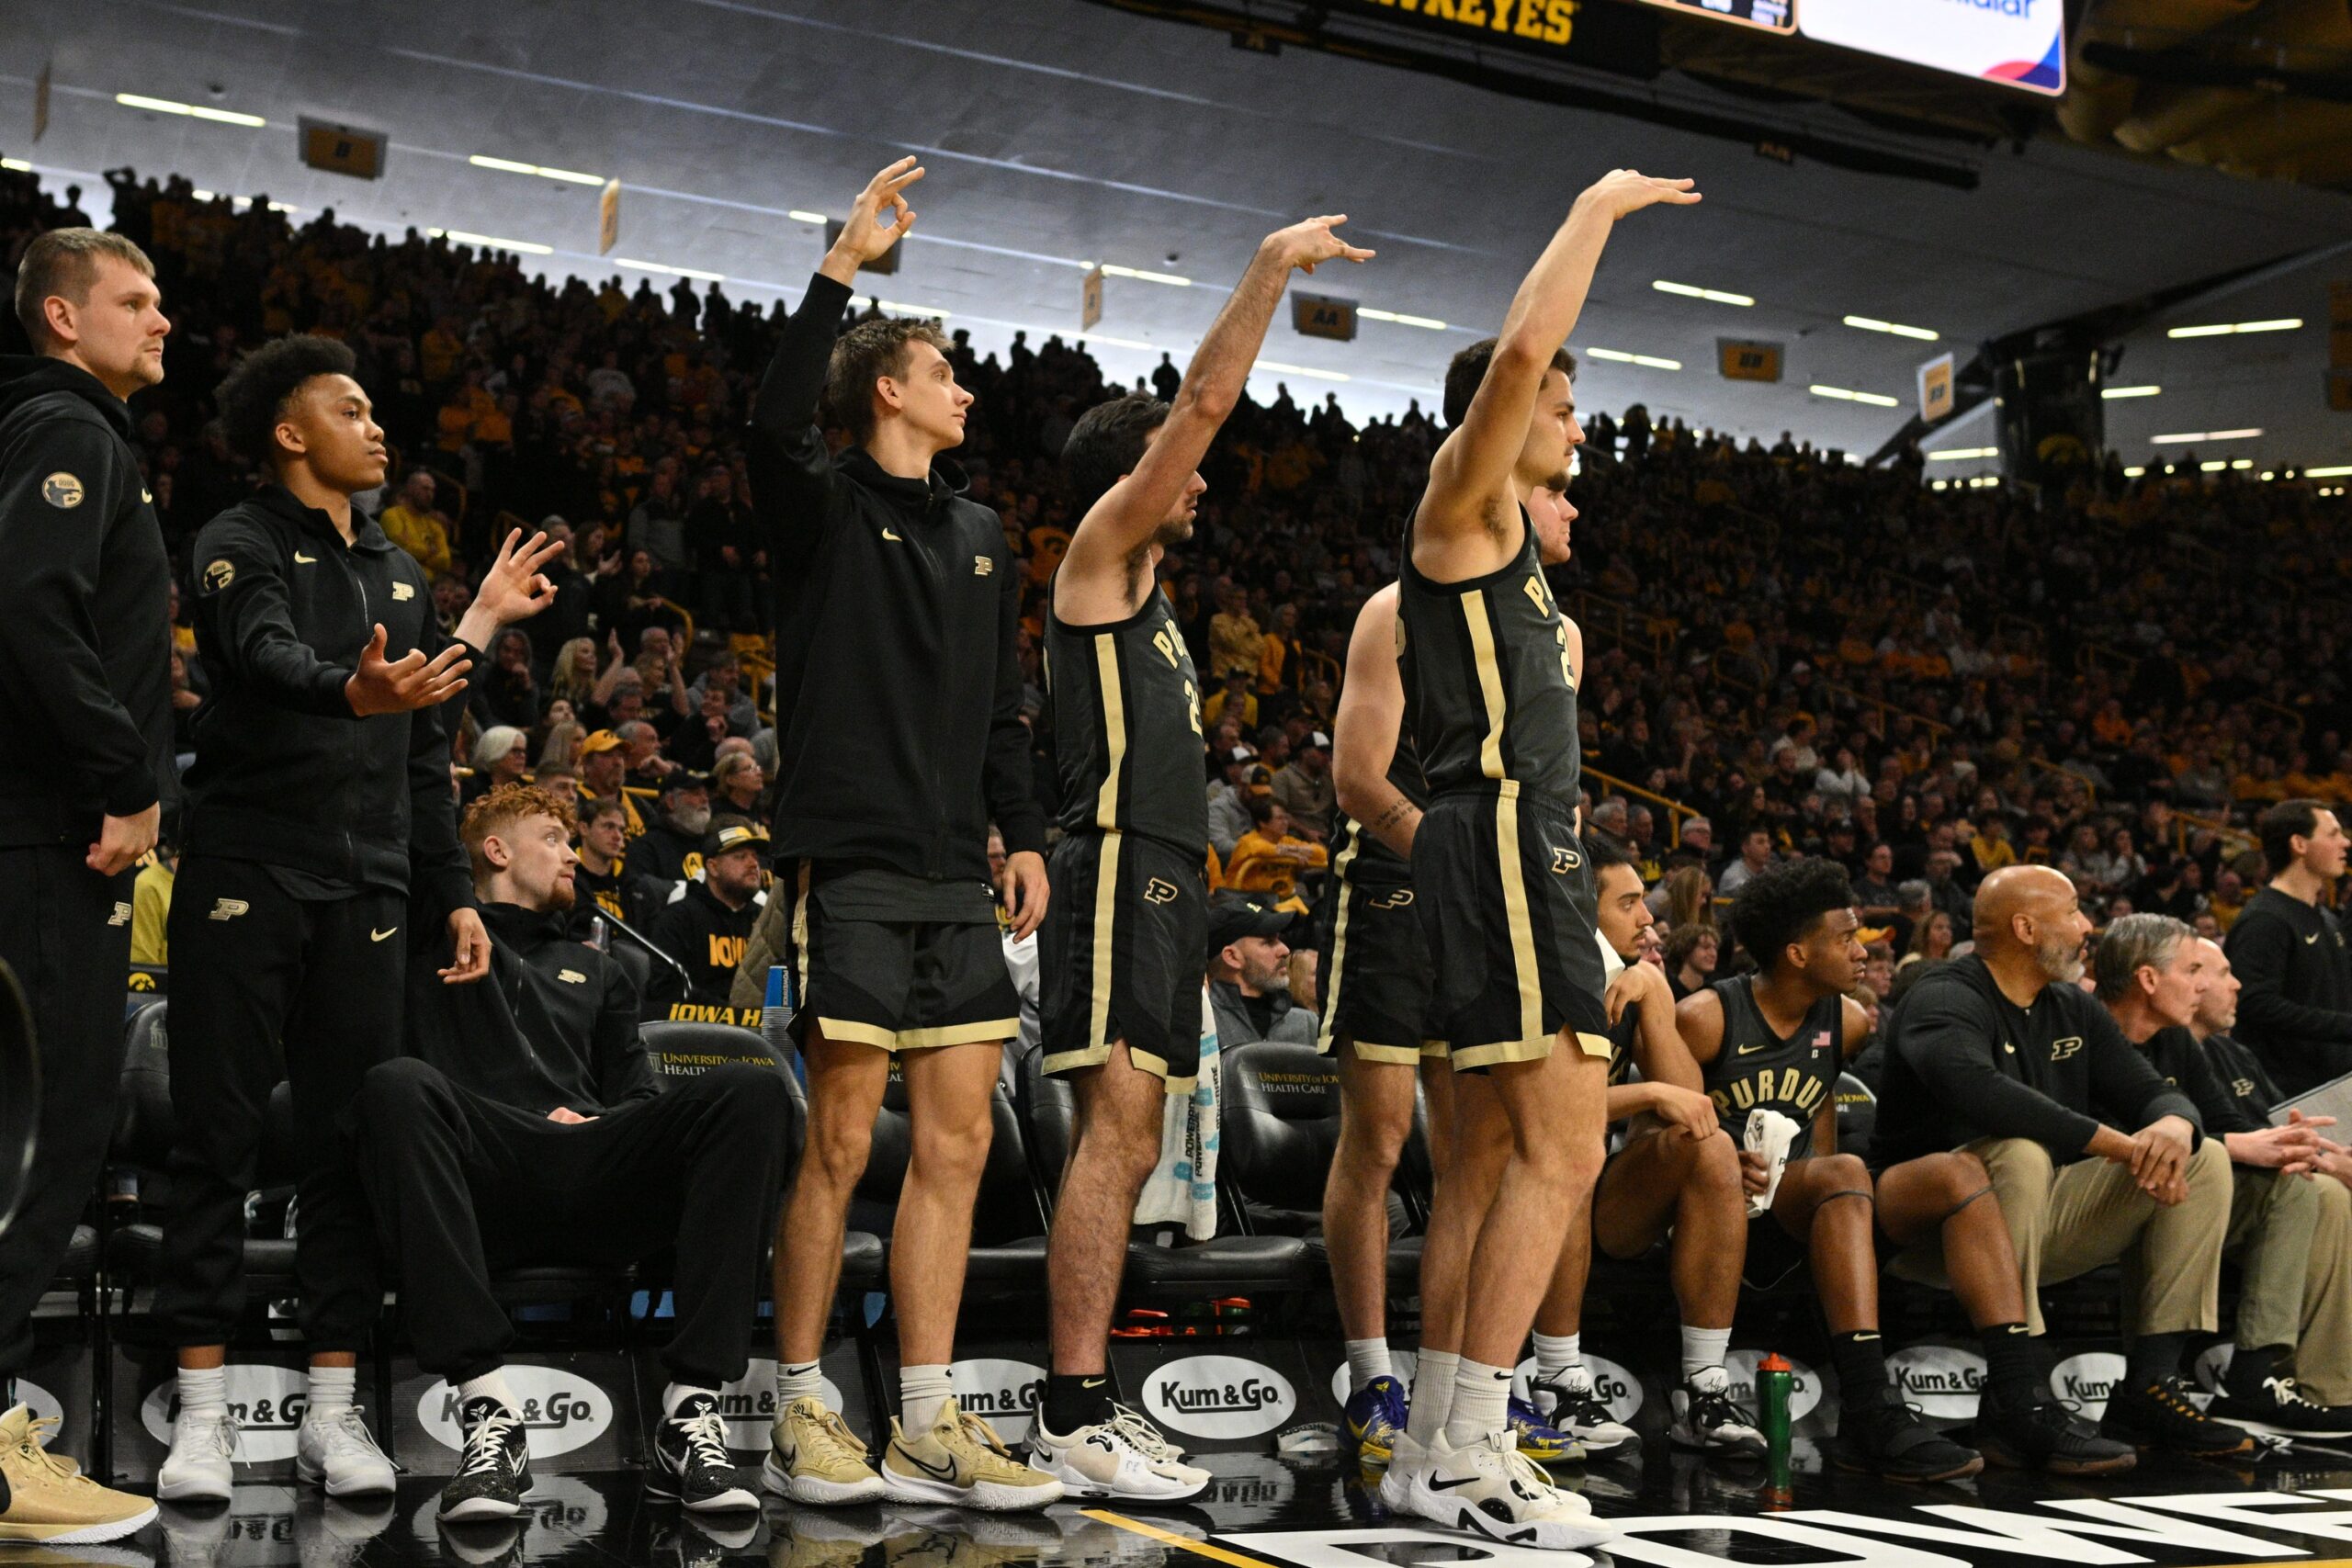 The Purdue Boilermakers bench reacts during the second half against the Iowa Hawkeyes at Carver-Hawkeye Arena.